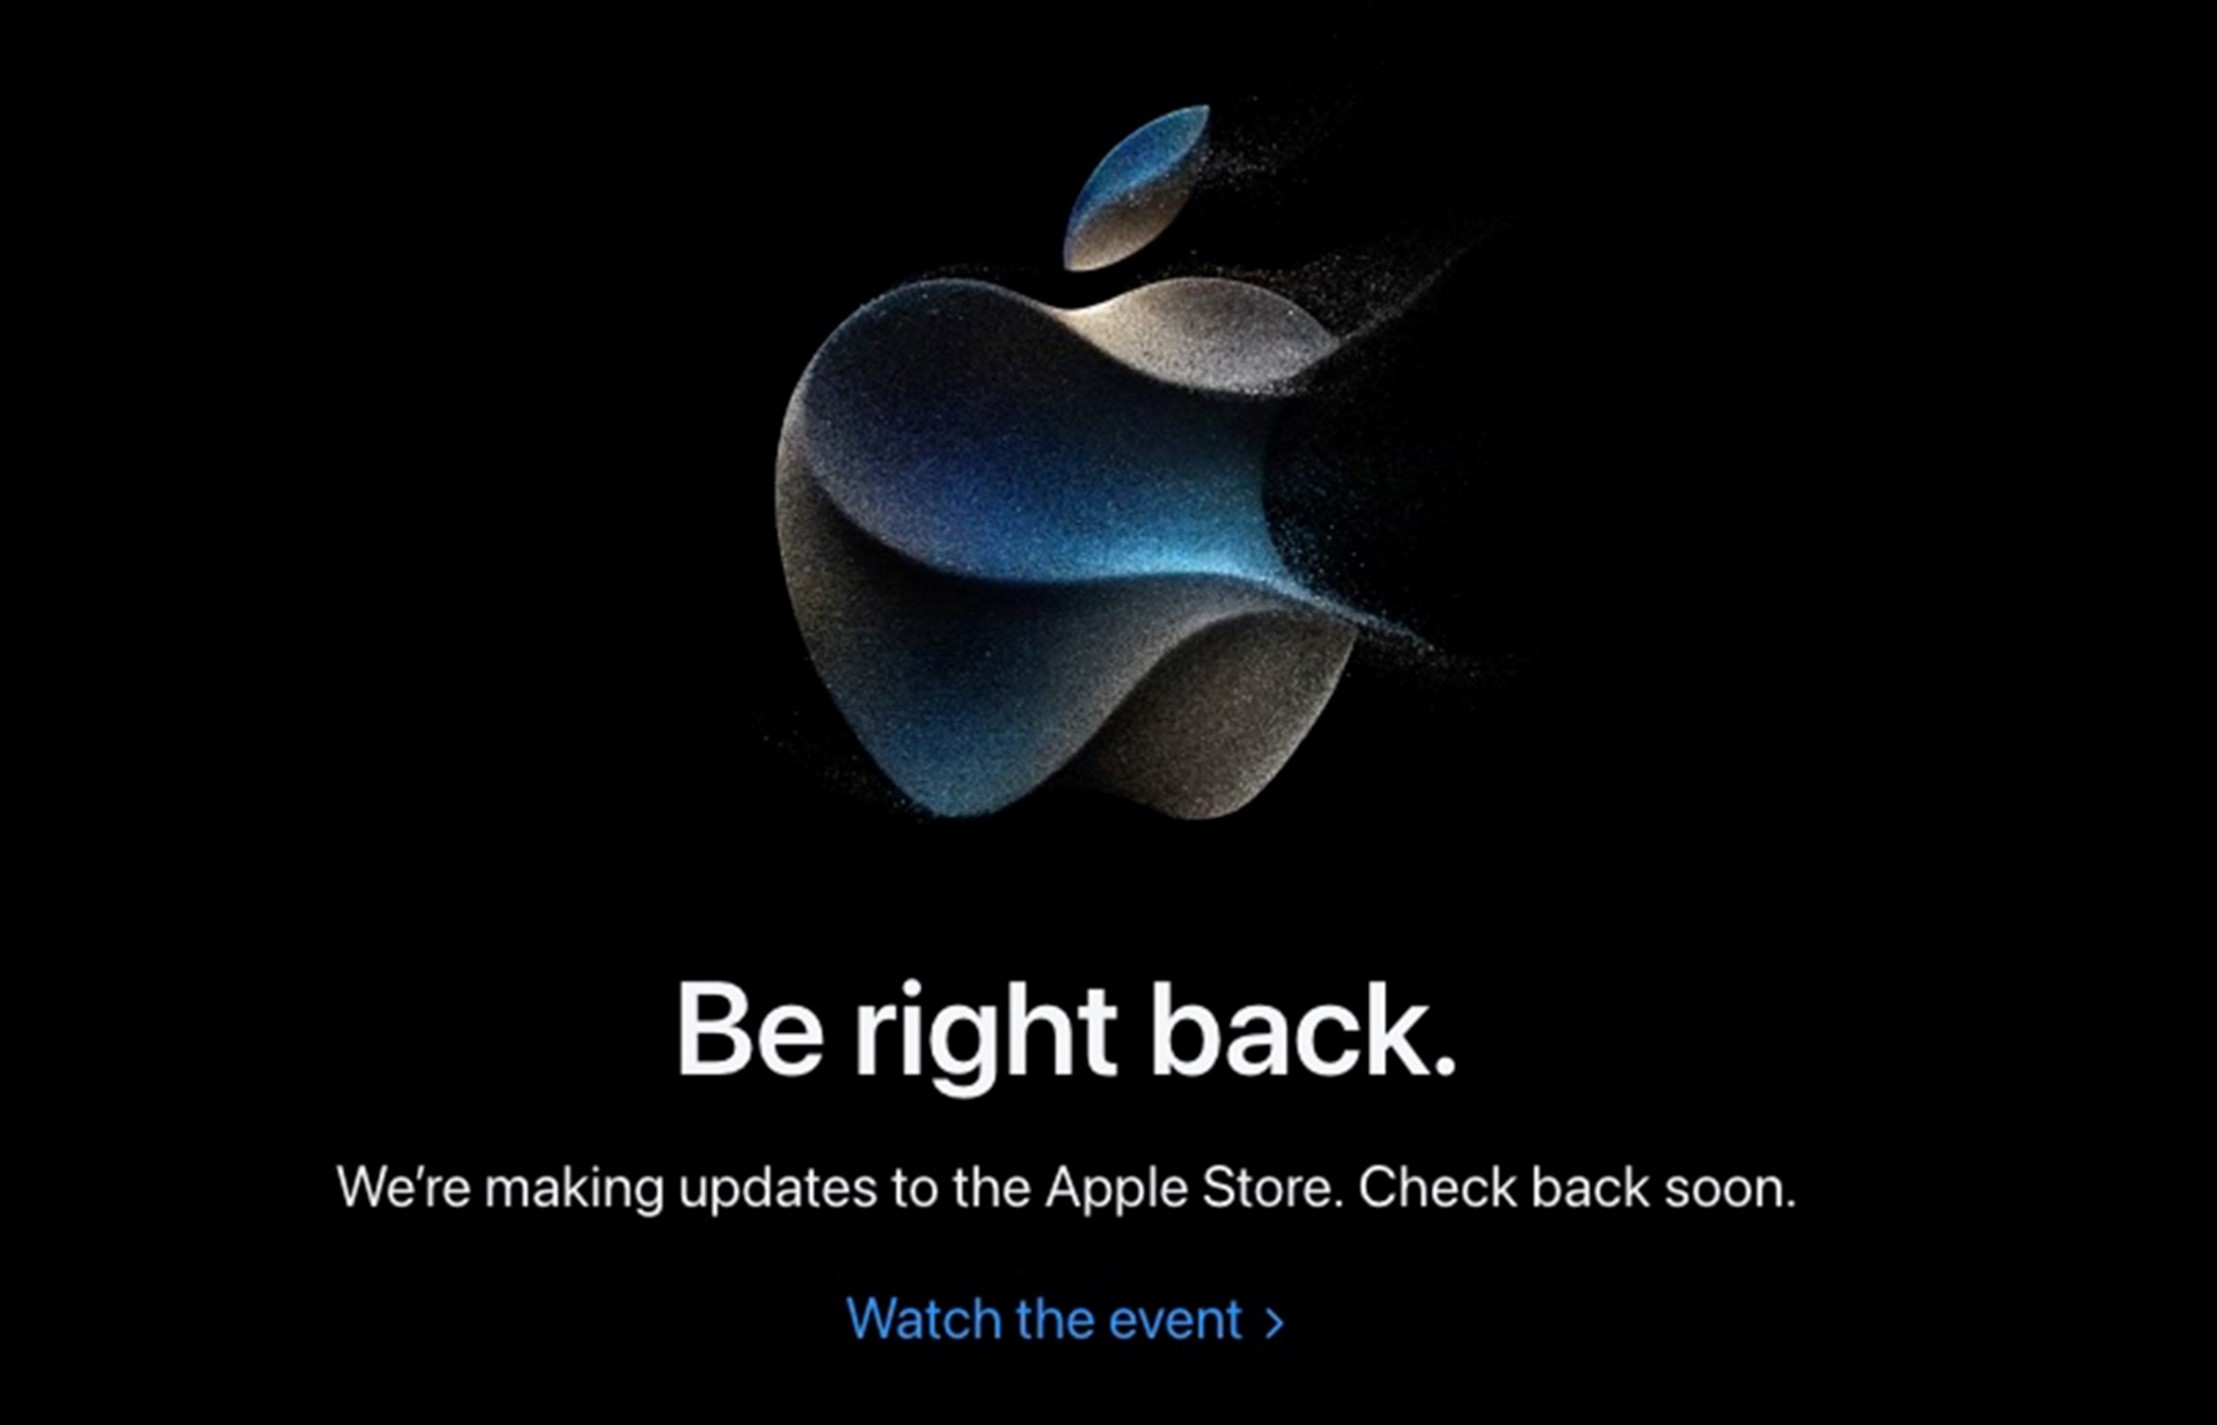 Apple store homepage with text reading "We'll be right back"